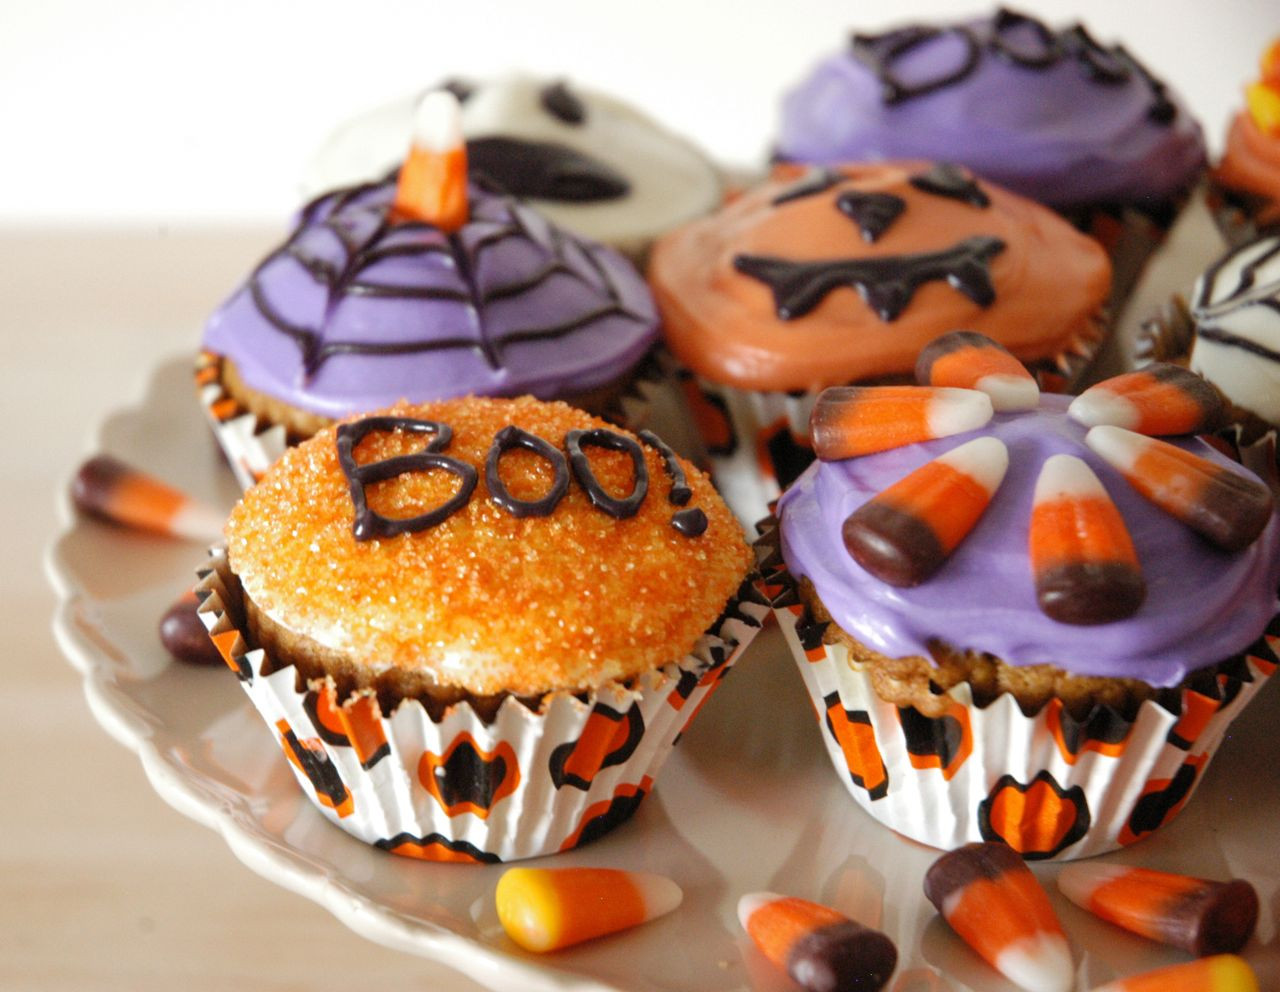 Picture Of Halloween Cupcakes
 Goddess of Baking Spiced Pumpkin Cupcakes for Halloween